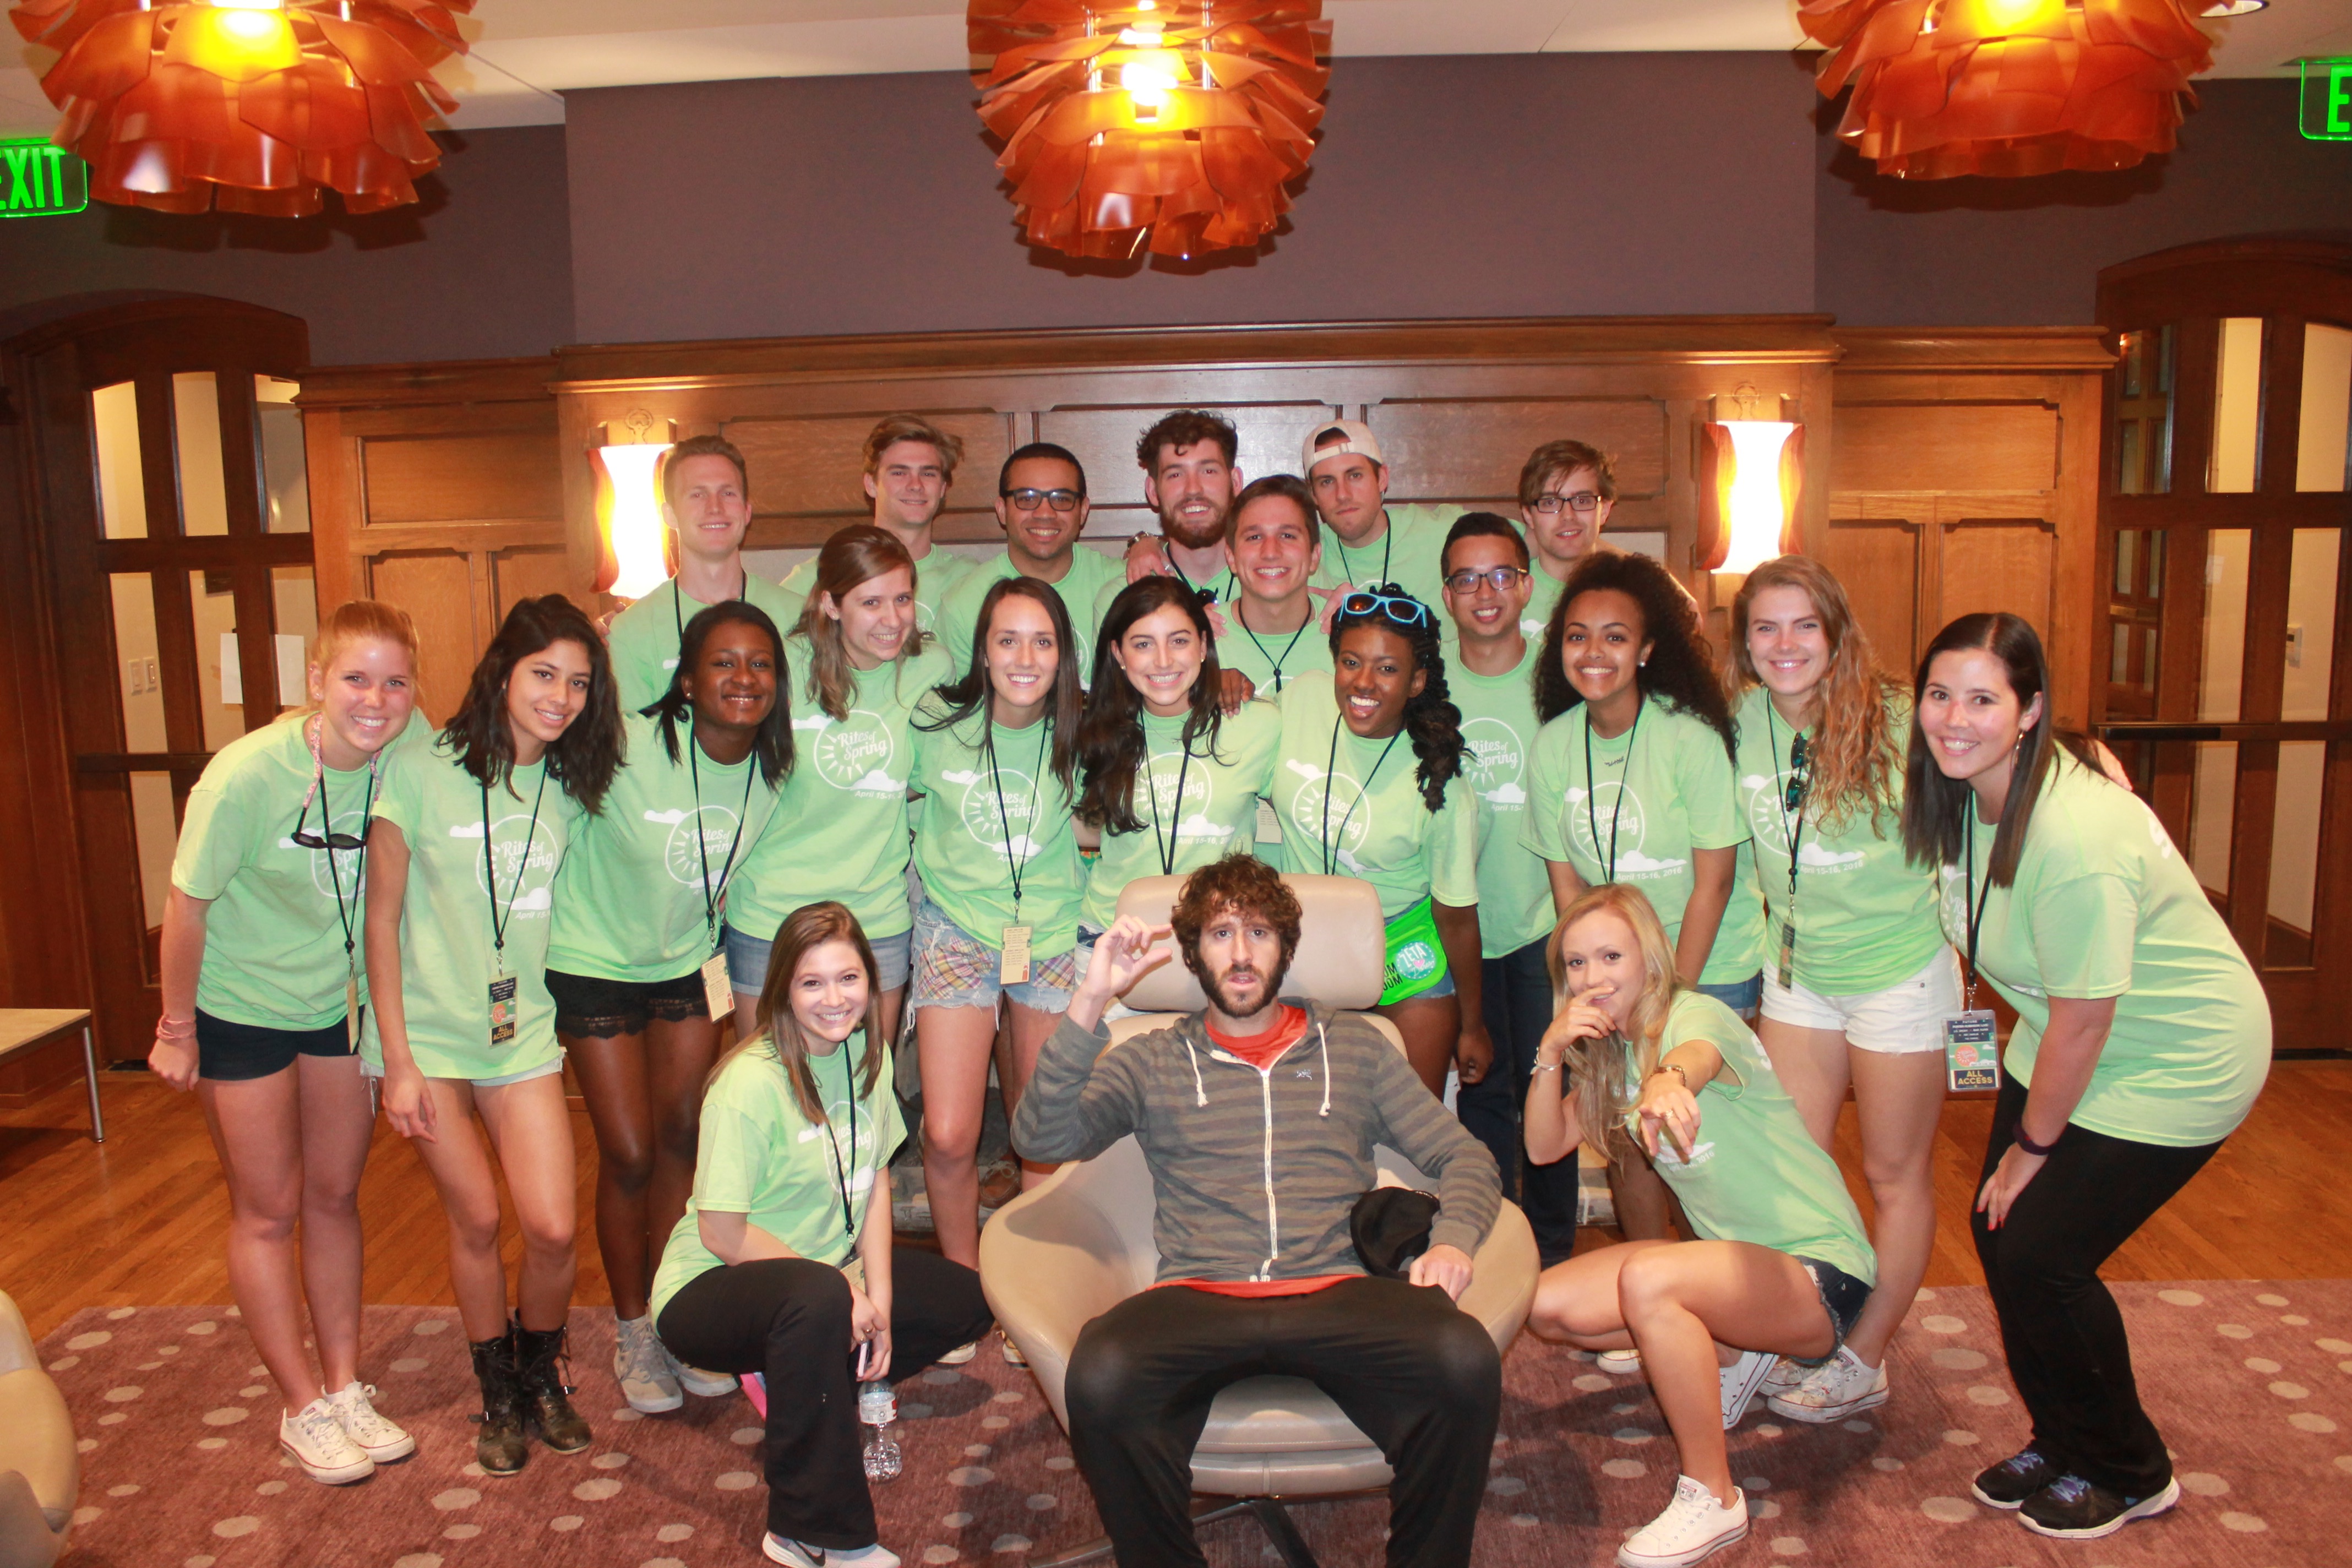 Lil Dicky and the Music Group